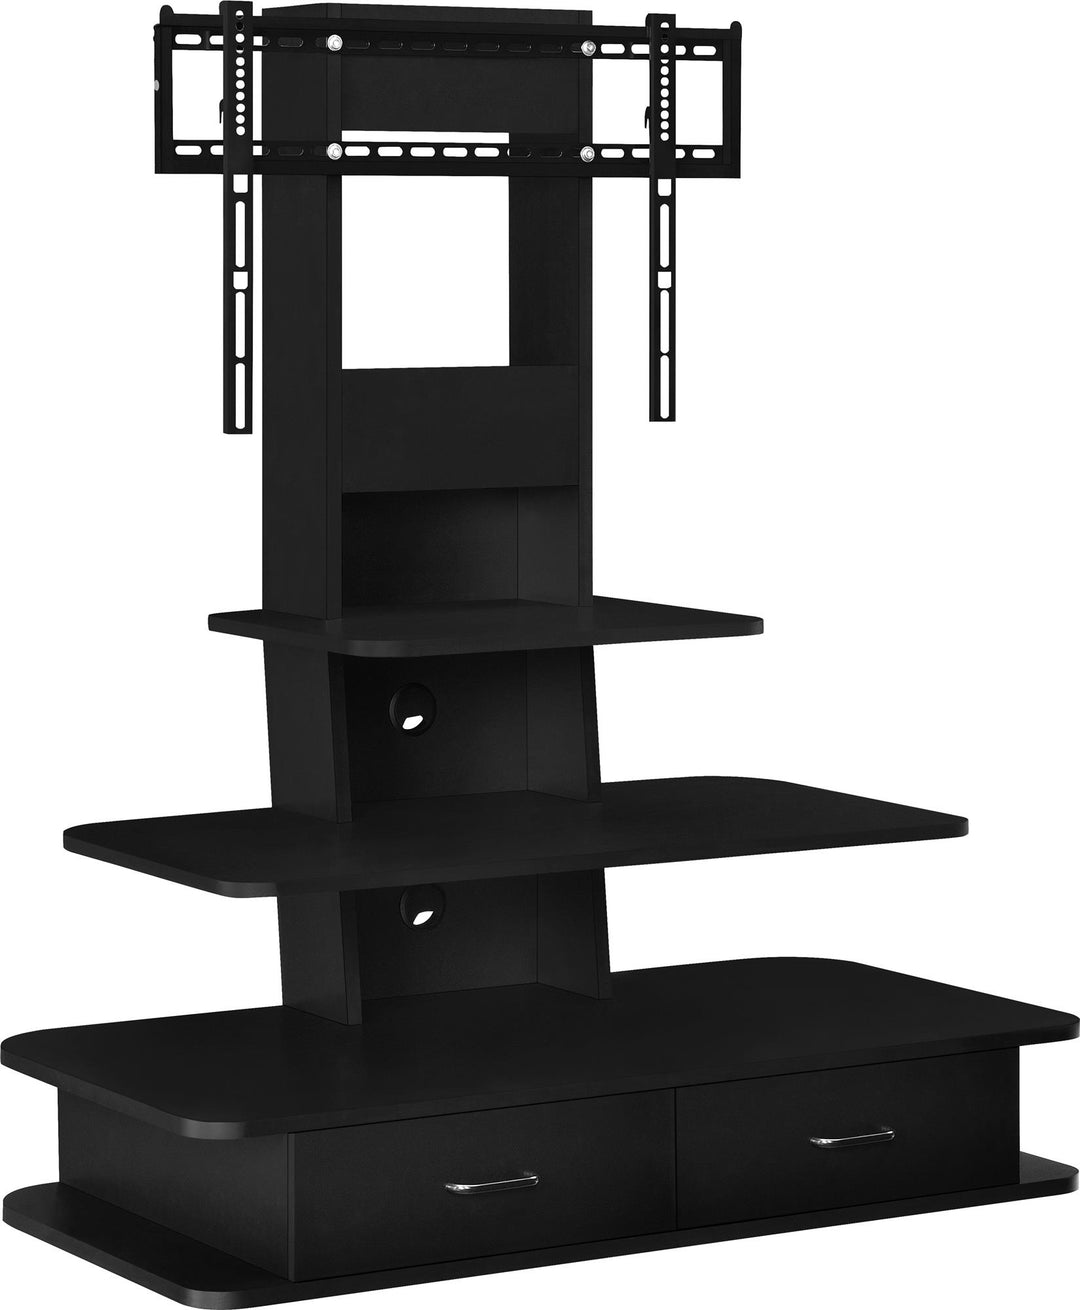 TV stand with mount and storage - Black